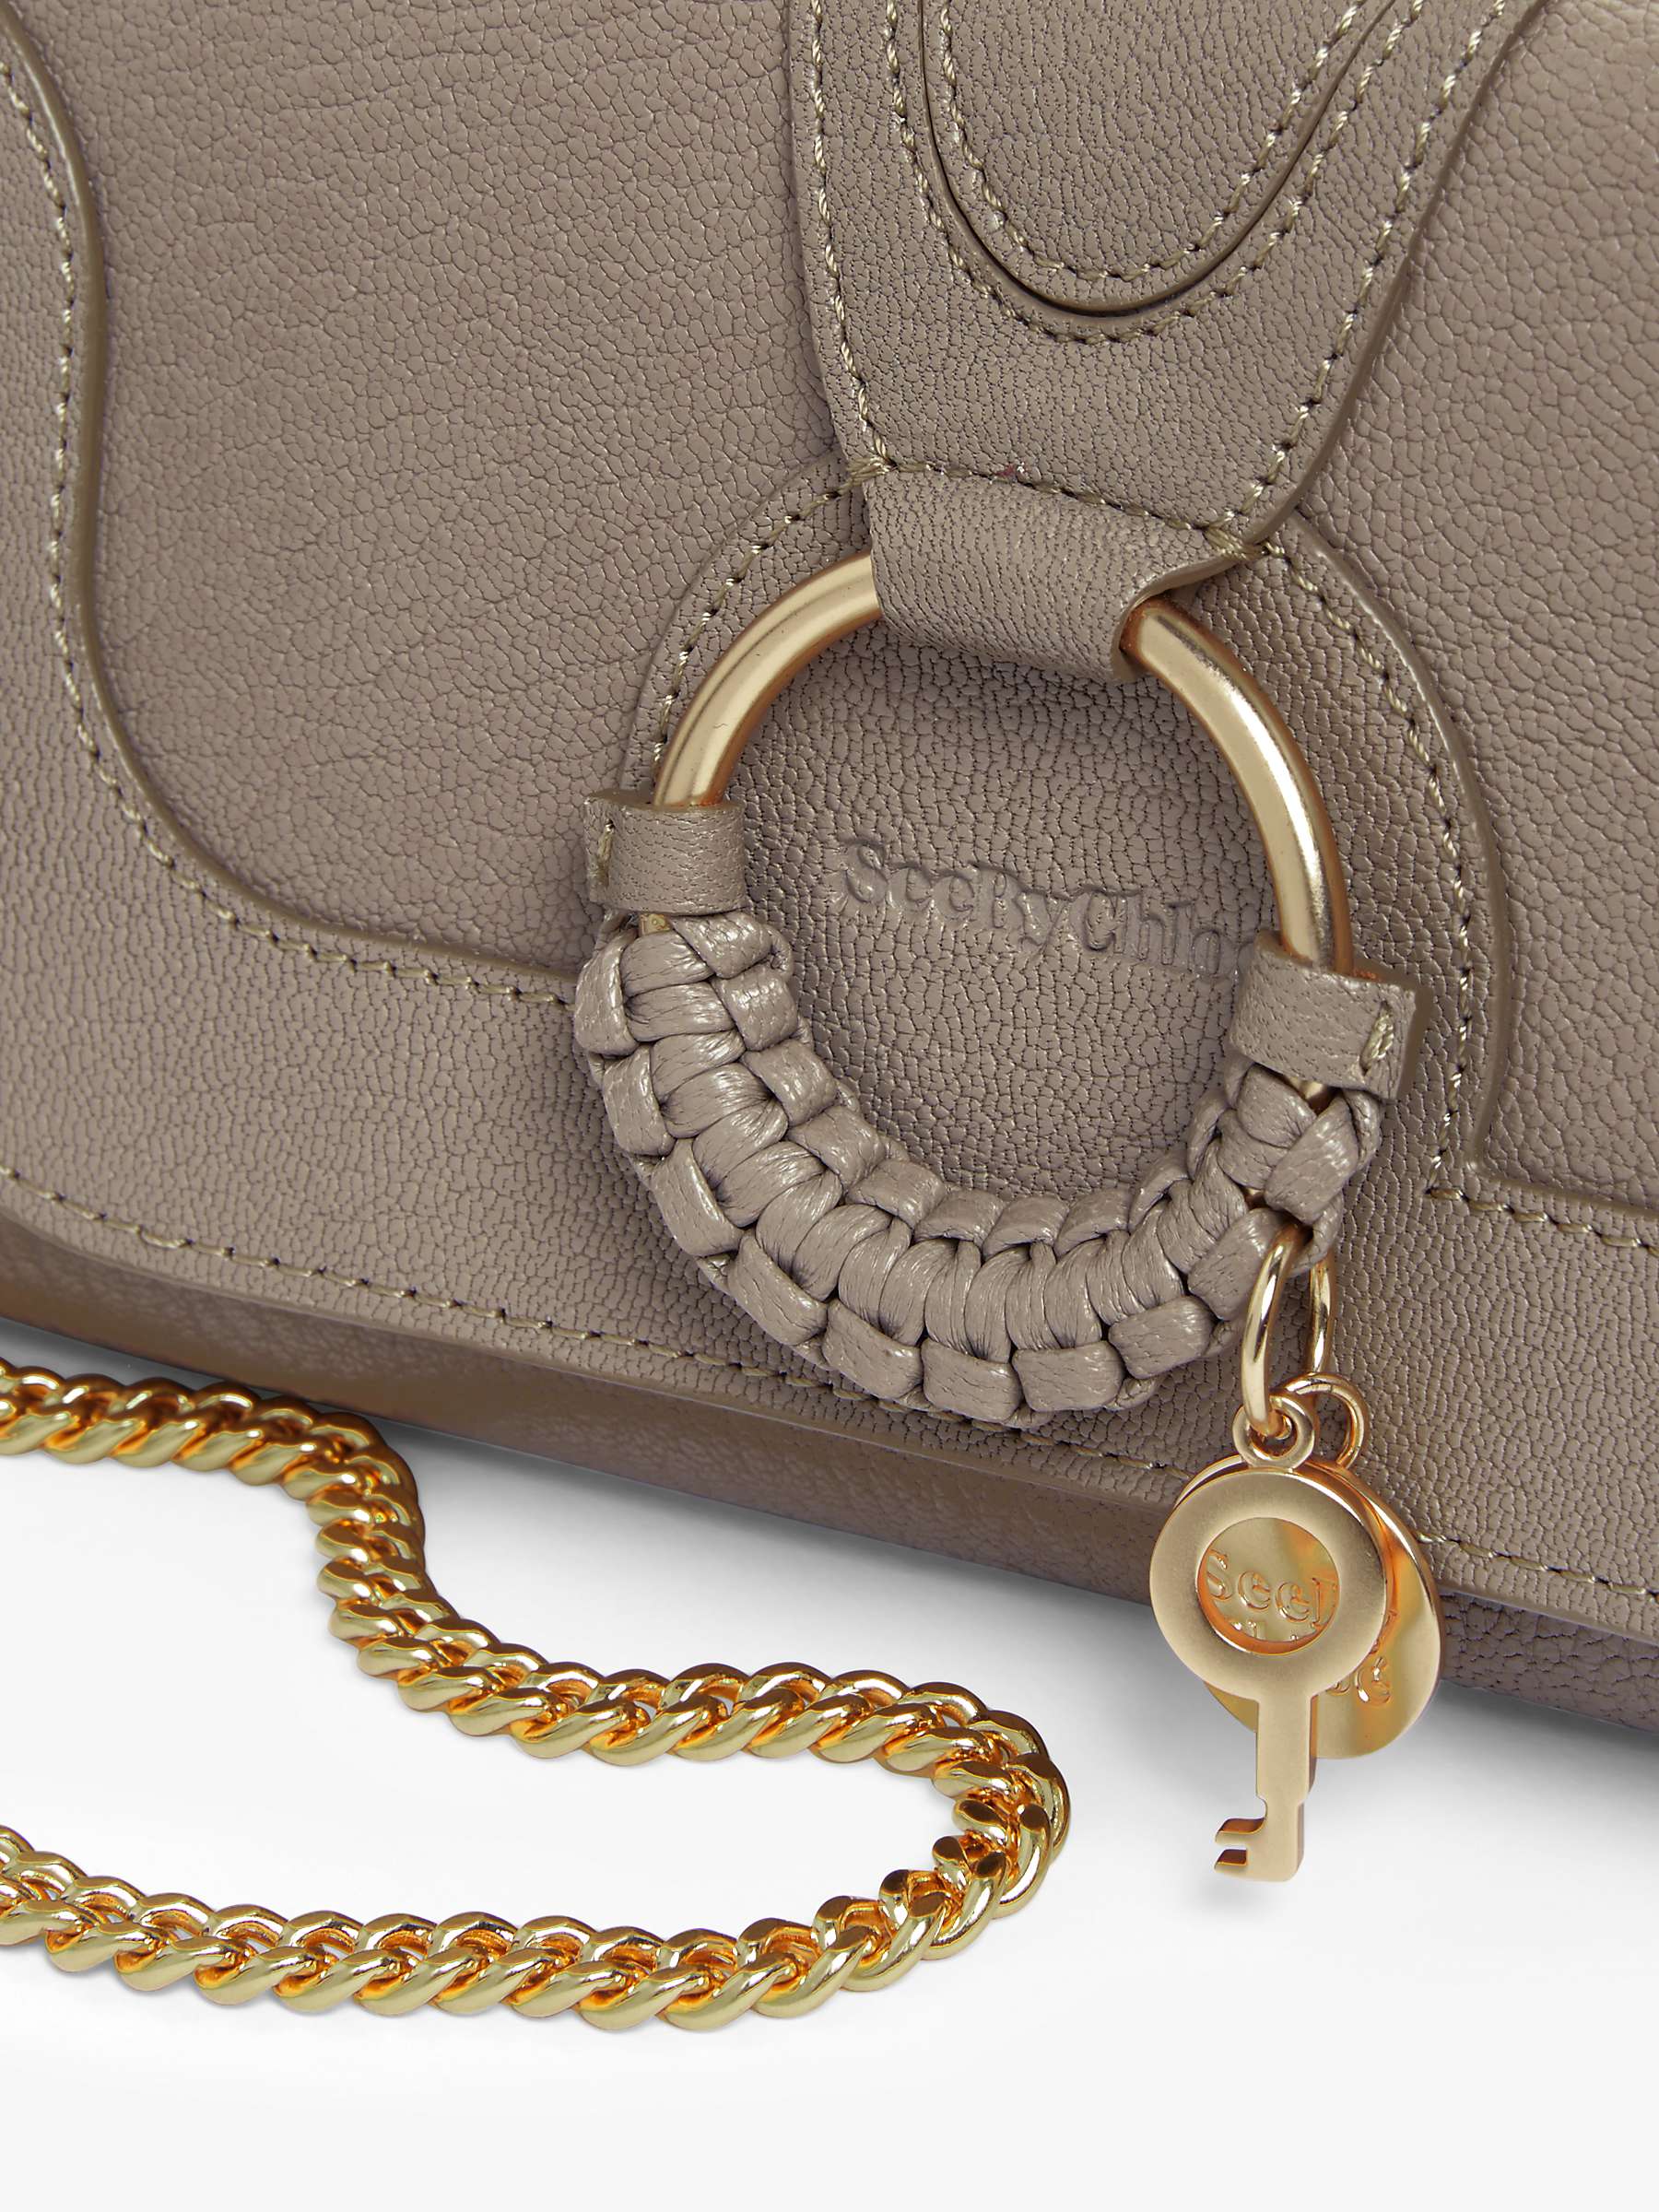 Buy See By Chloé Hana Large Leather Chain Purse Online at johnlewis.com